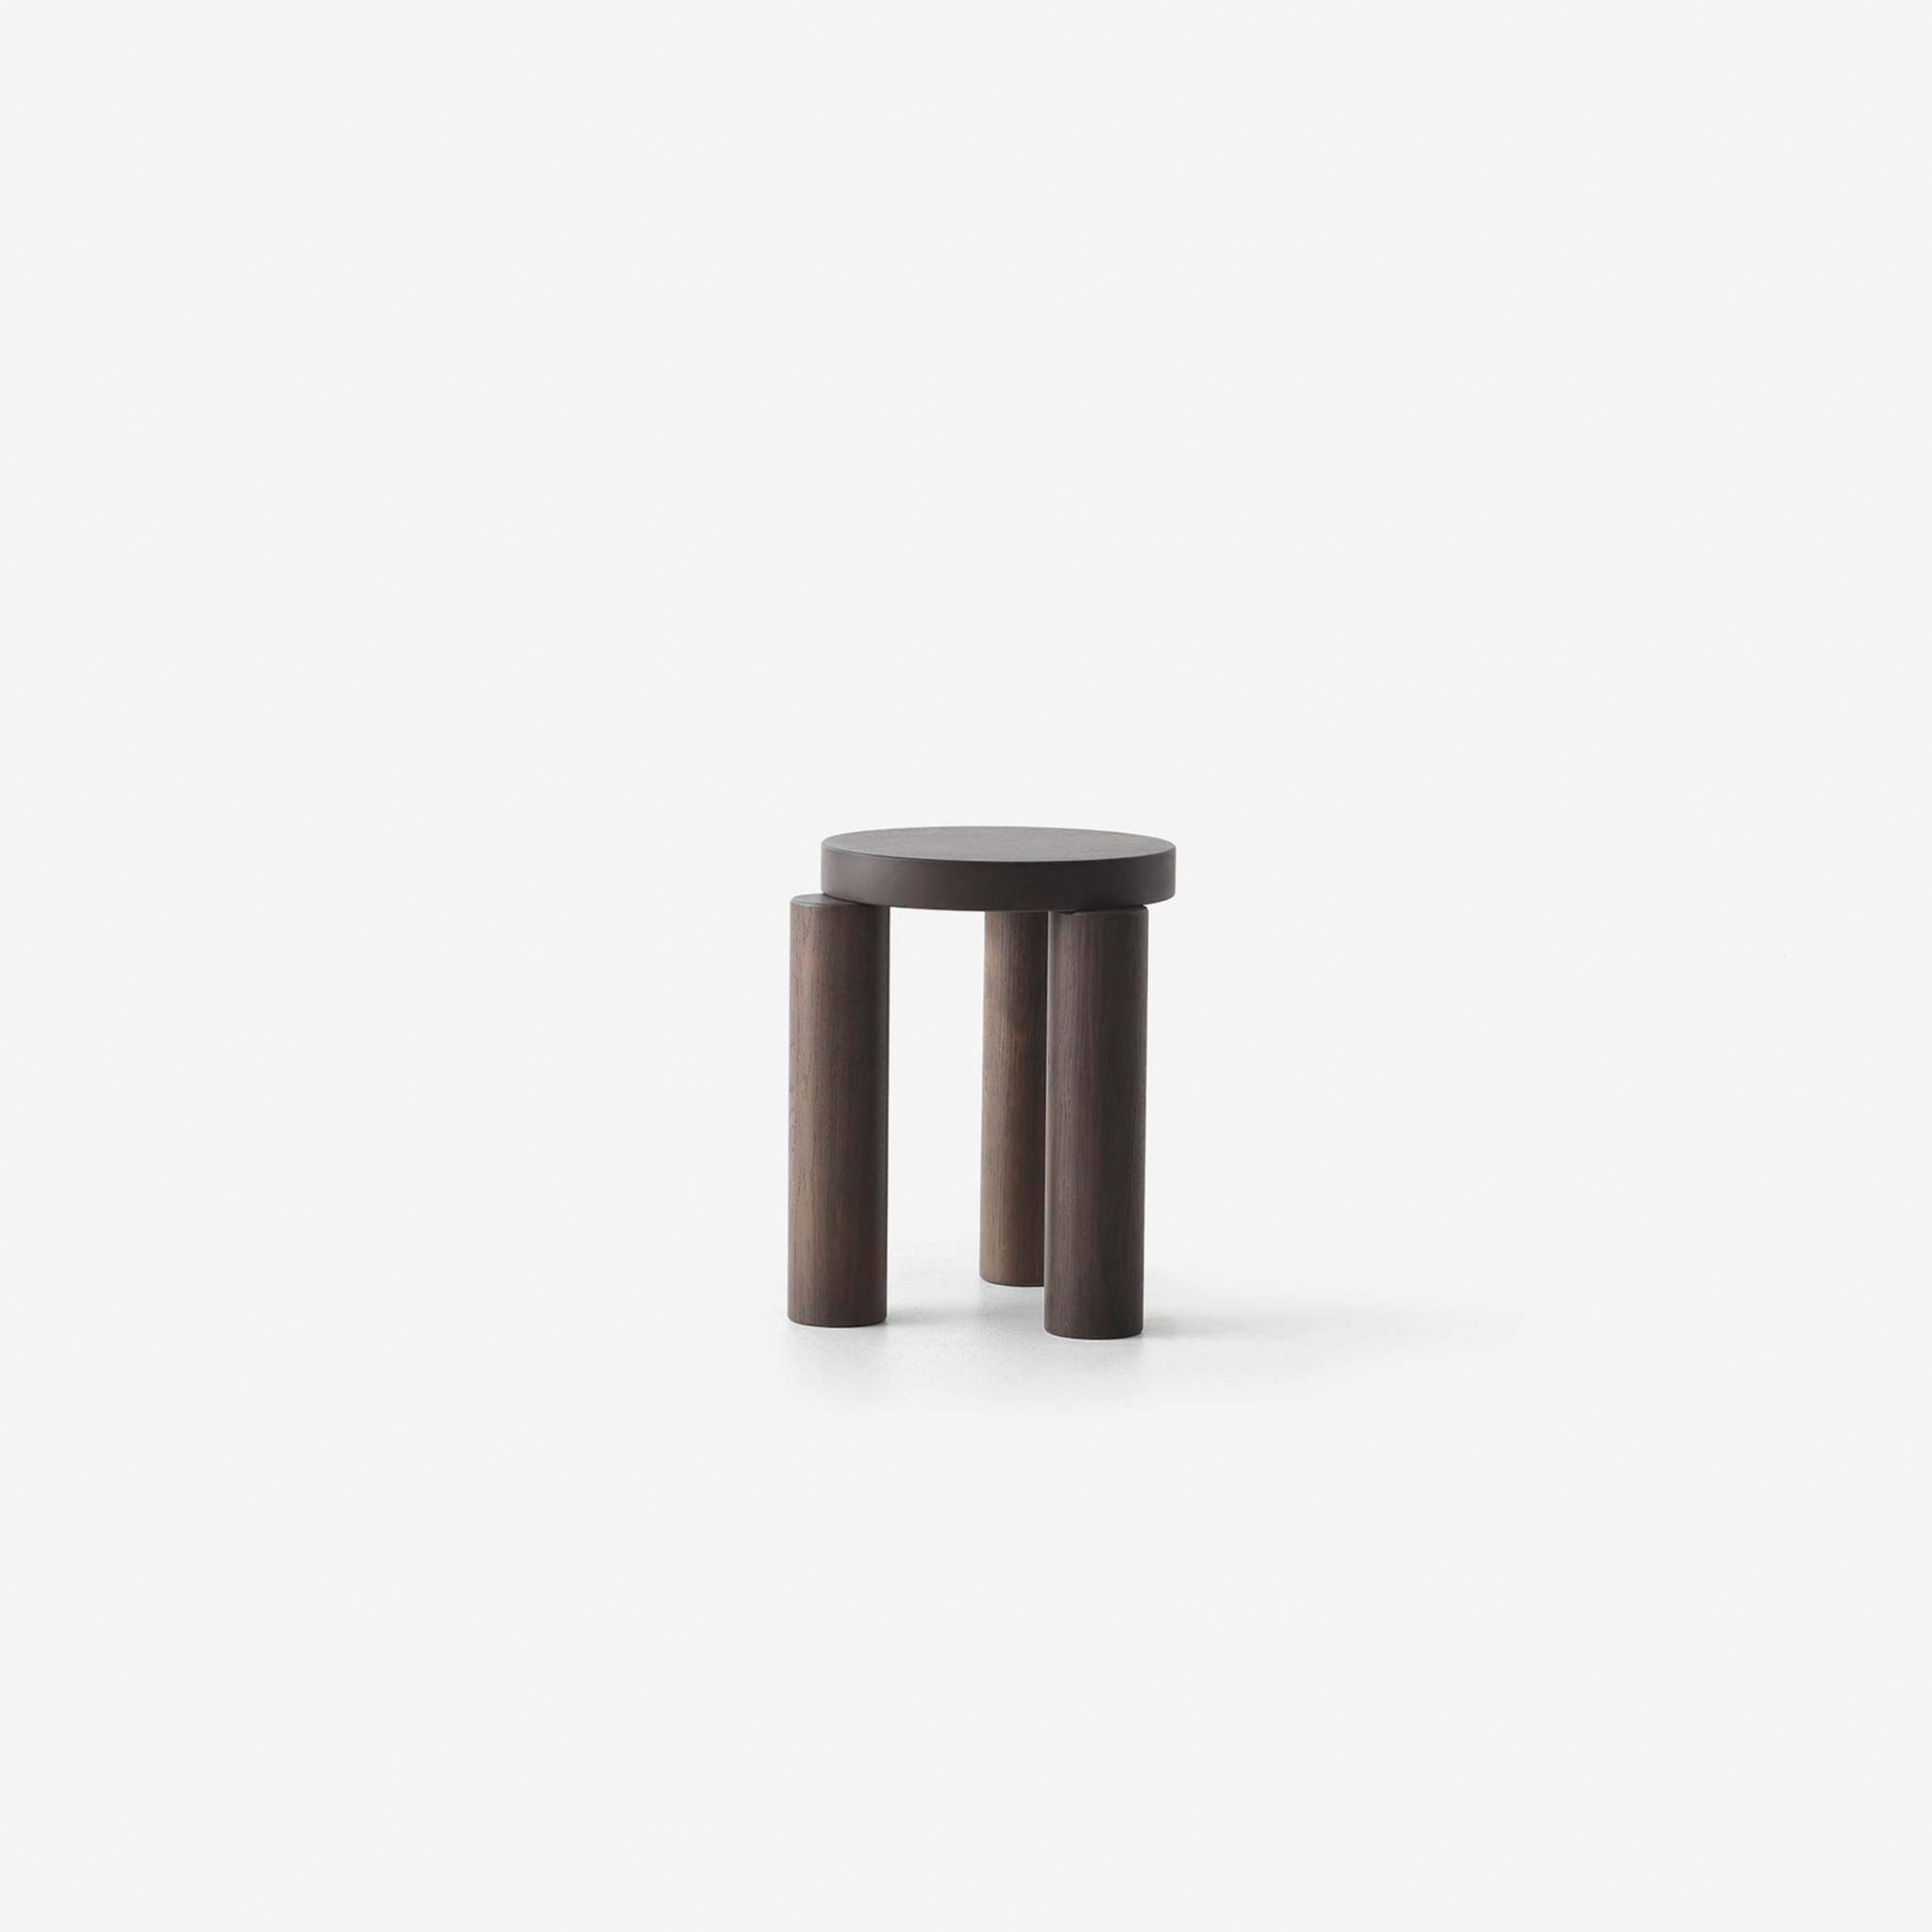 Offset Stool / Side Table